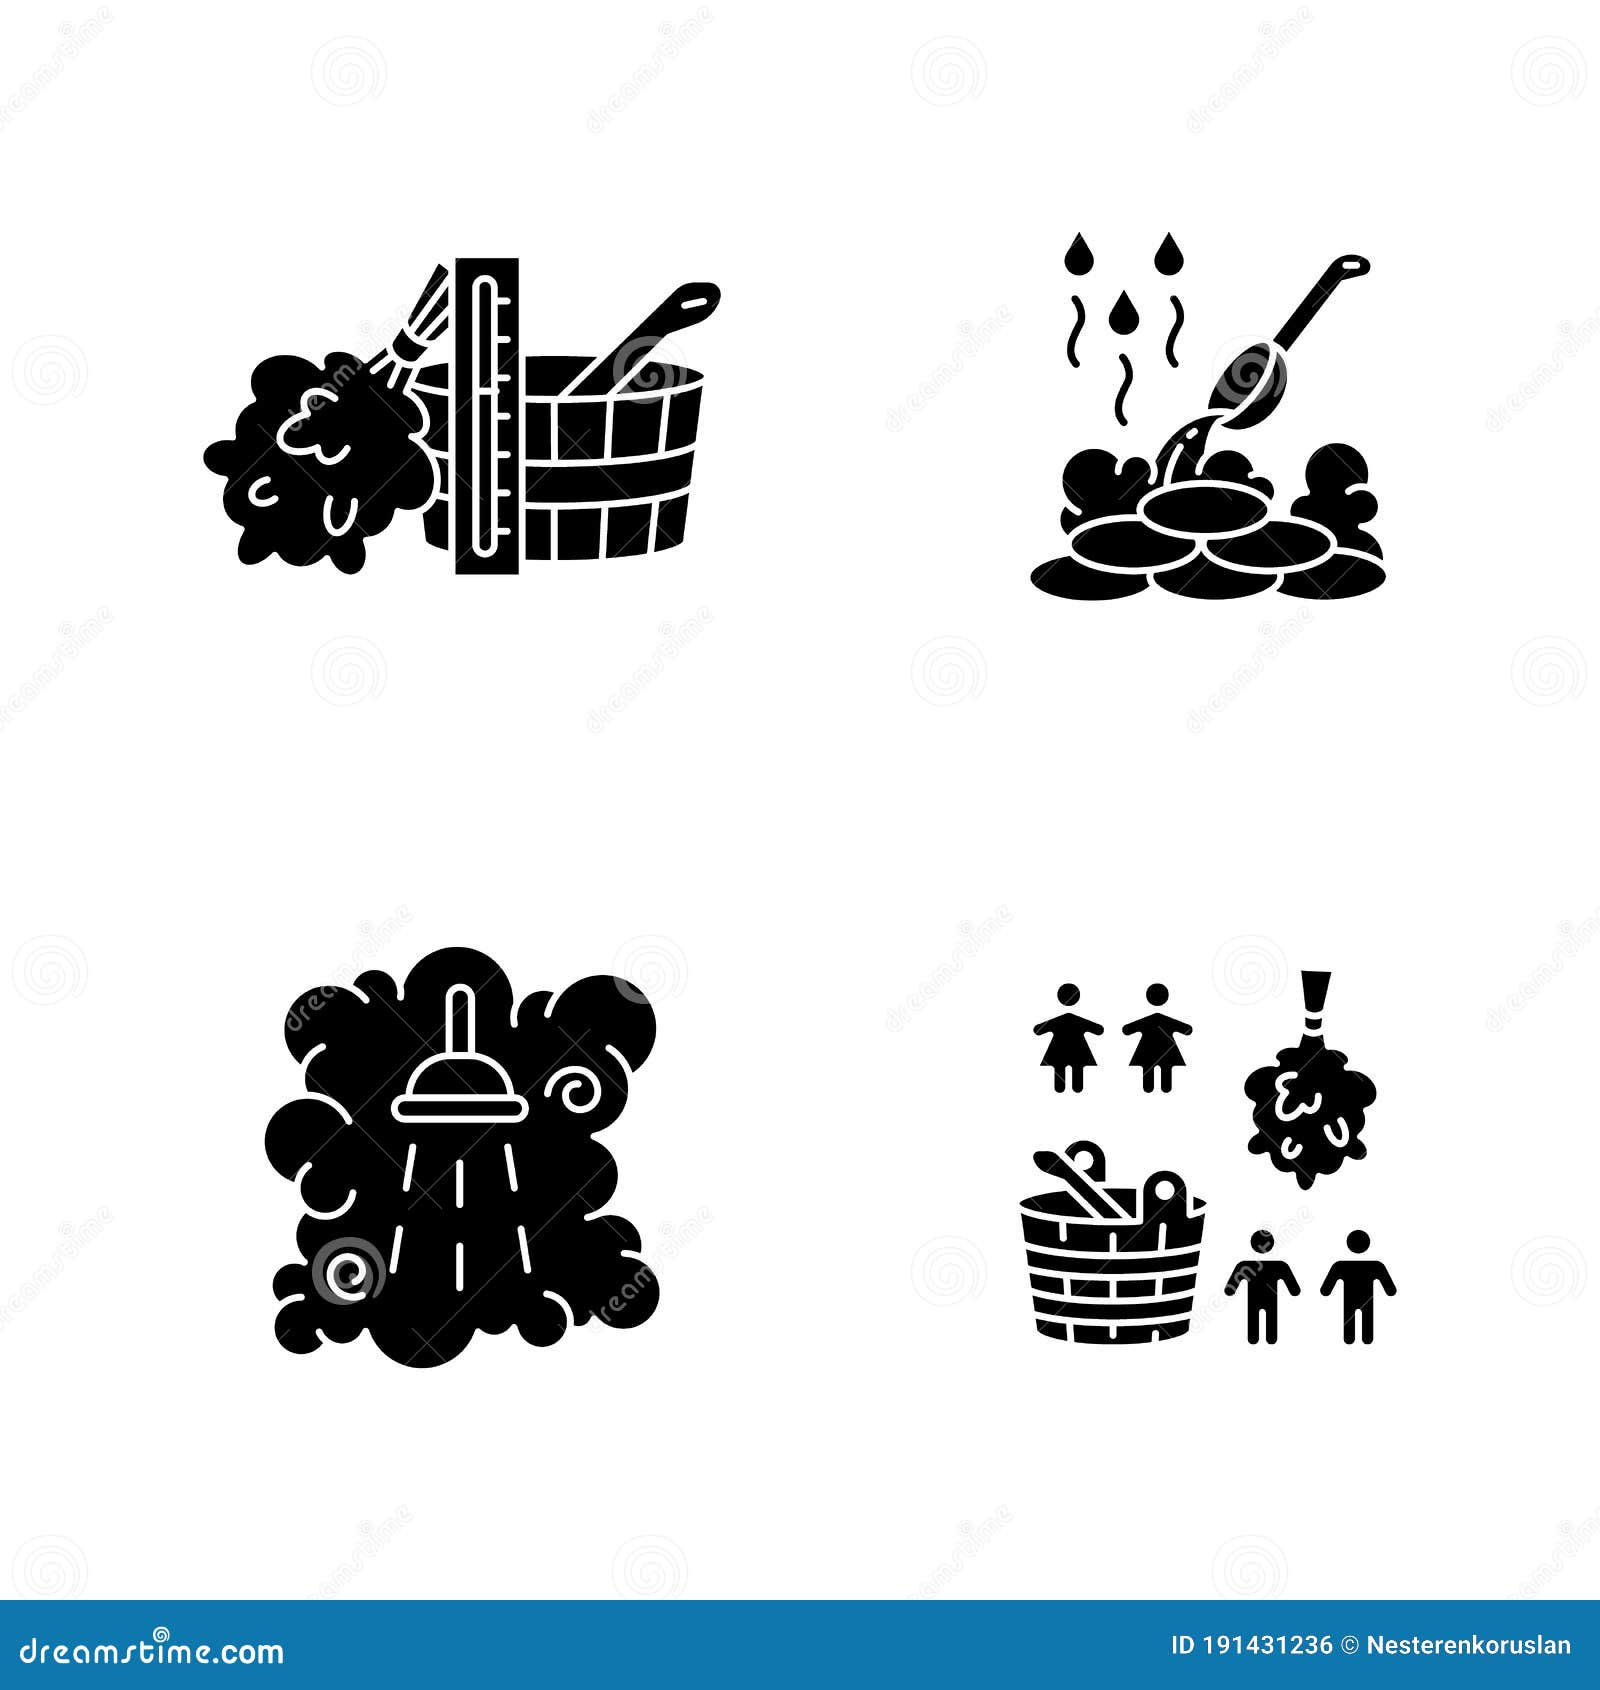 https://thumbs.dreamstime.com/z/sauna-culture-black-glyph-icons-set-white-space-finnish-russian-bathhouses-accessories-brooms-water-buckets-steam-shower-191431236.jpg